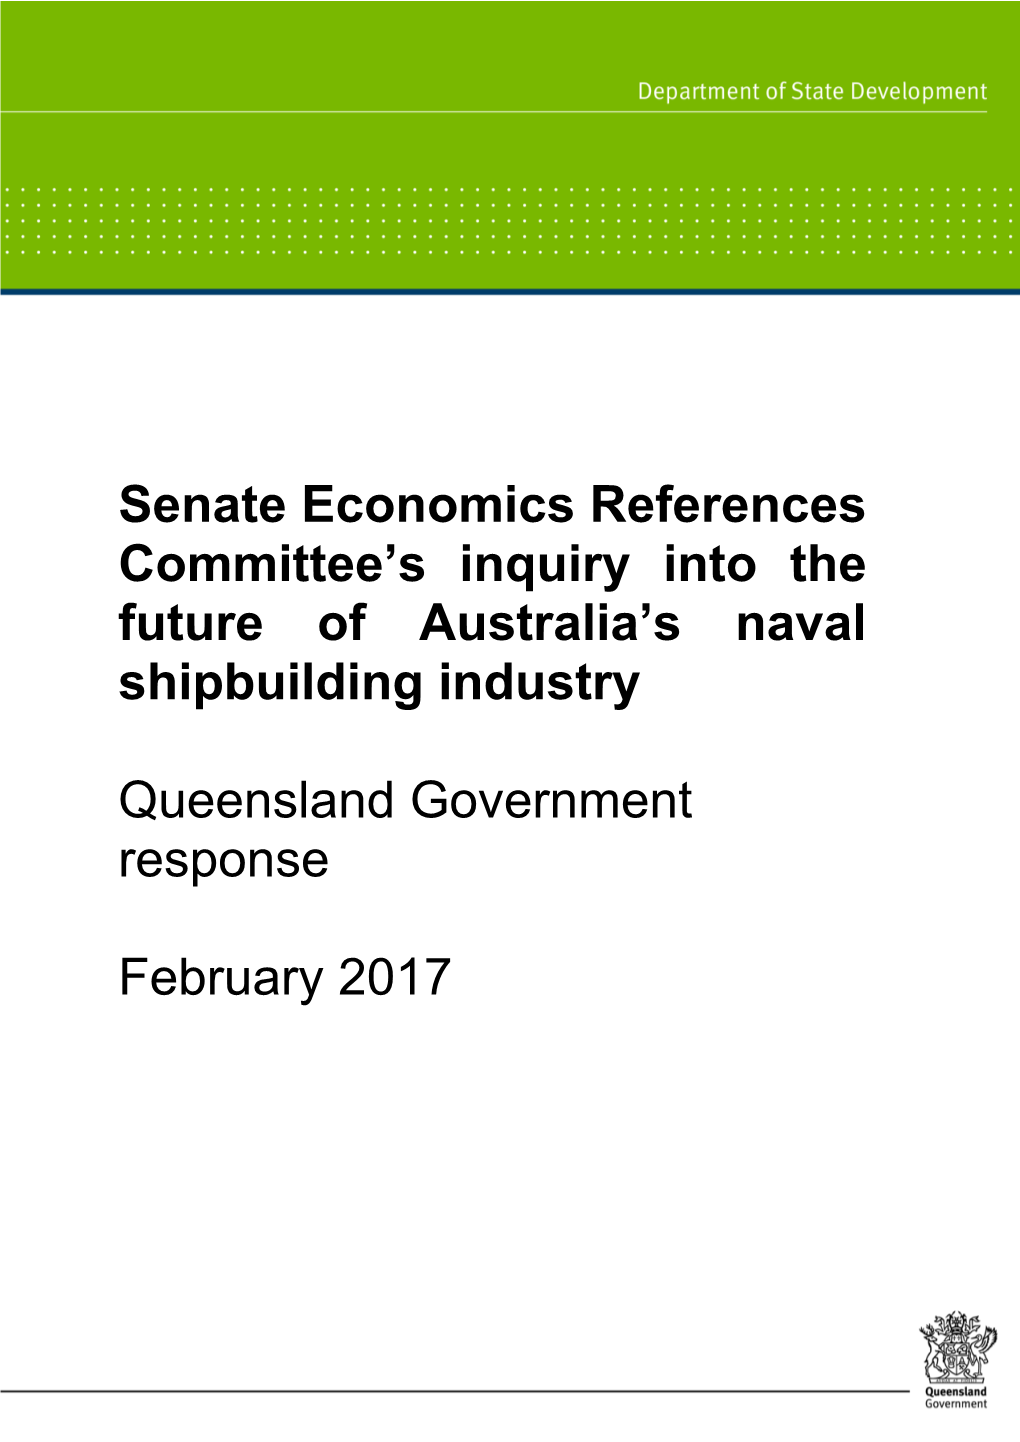 Senate Economics References Committee's Inquiry Into the Future of Australia's Naval Shipbuilding Industry Queensland Govern